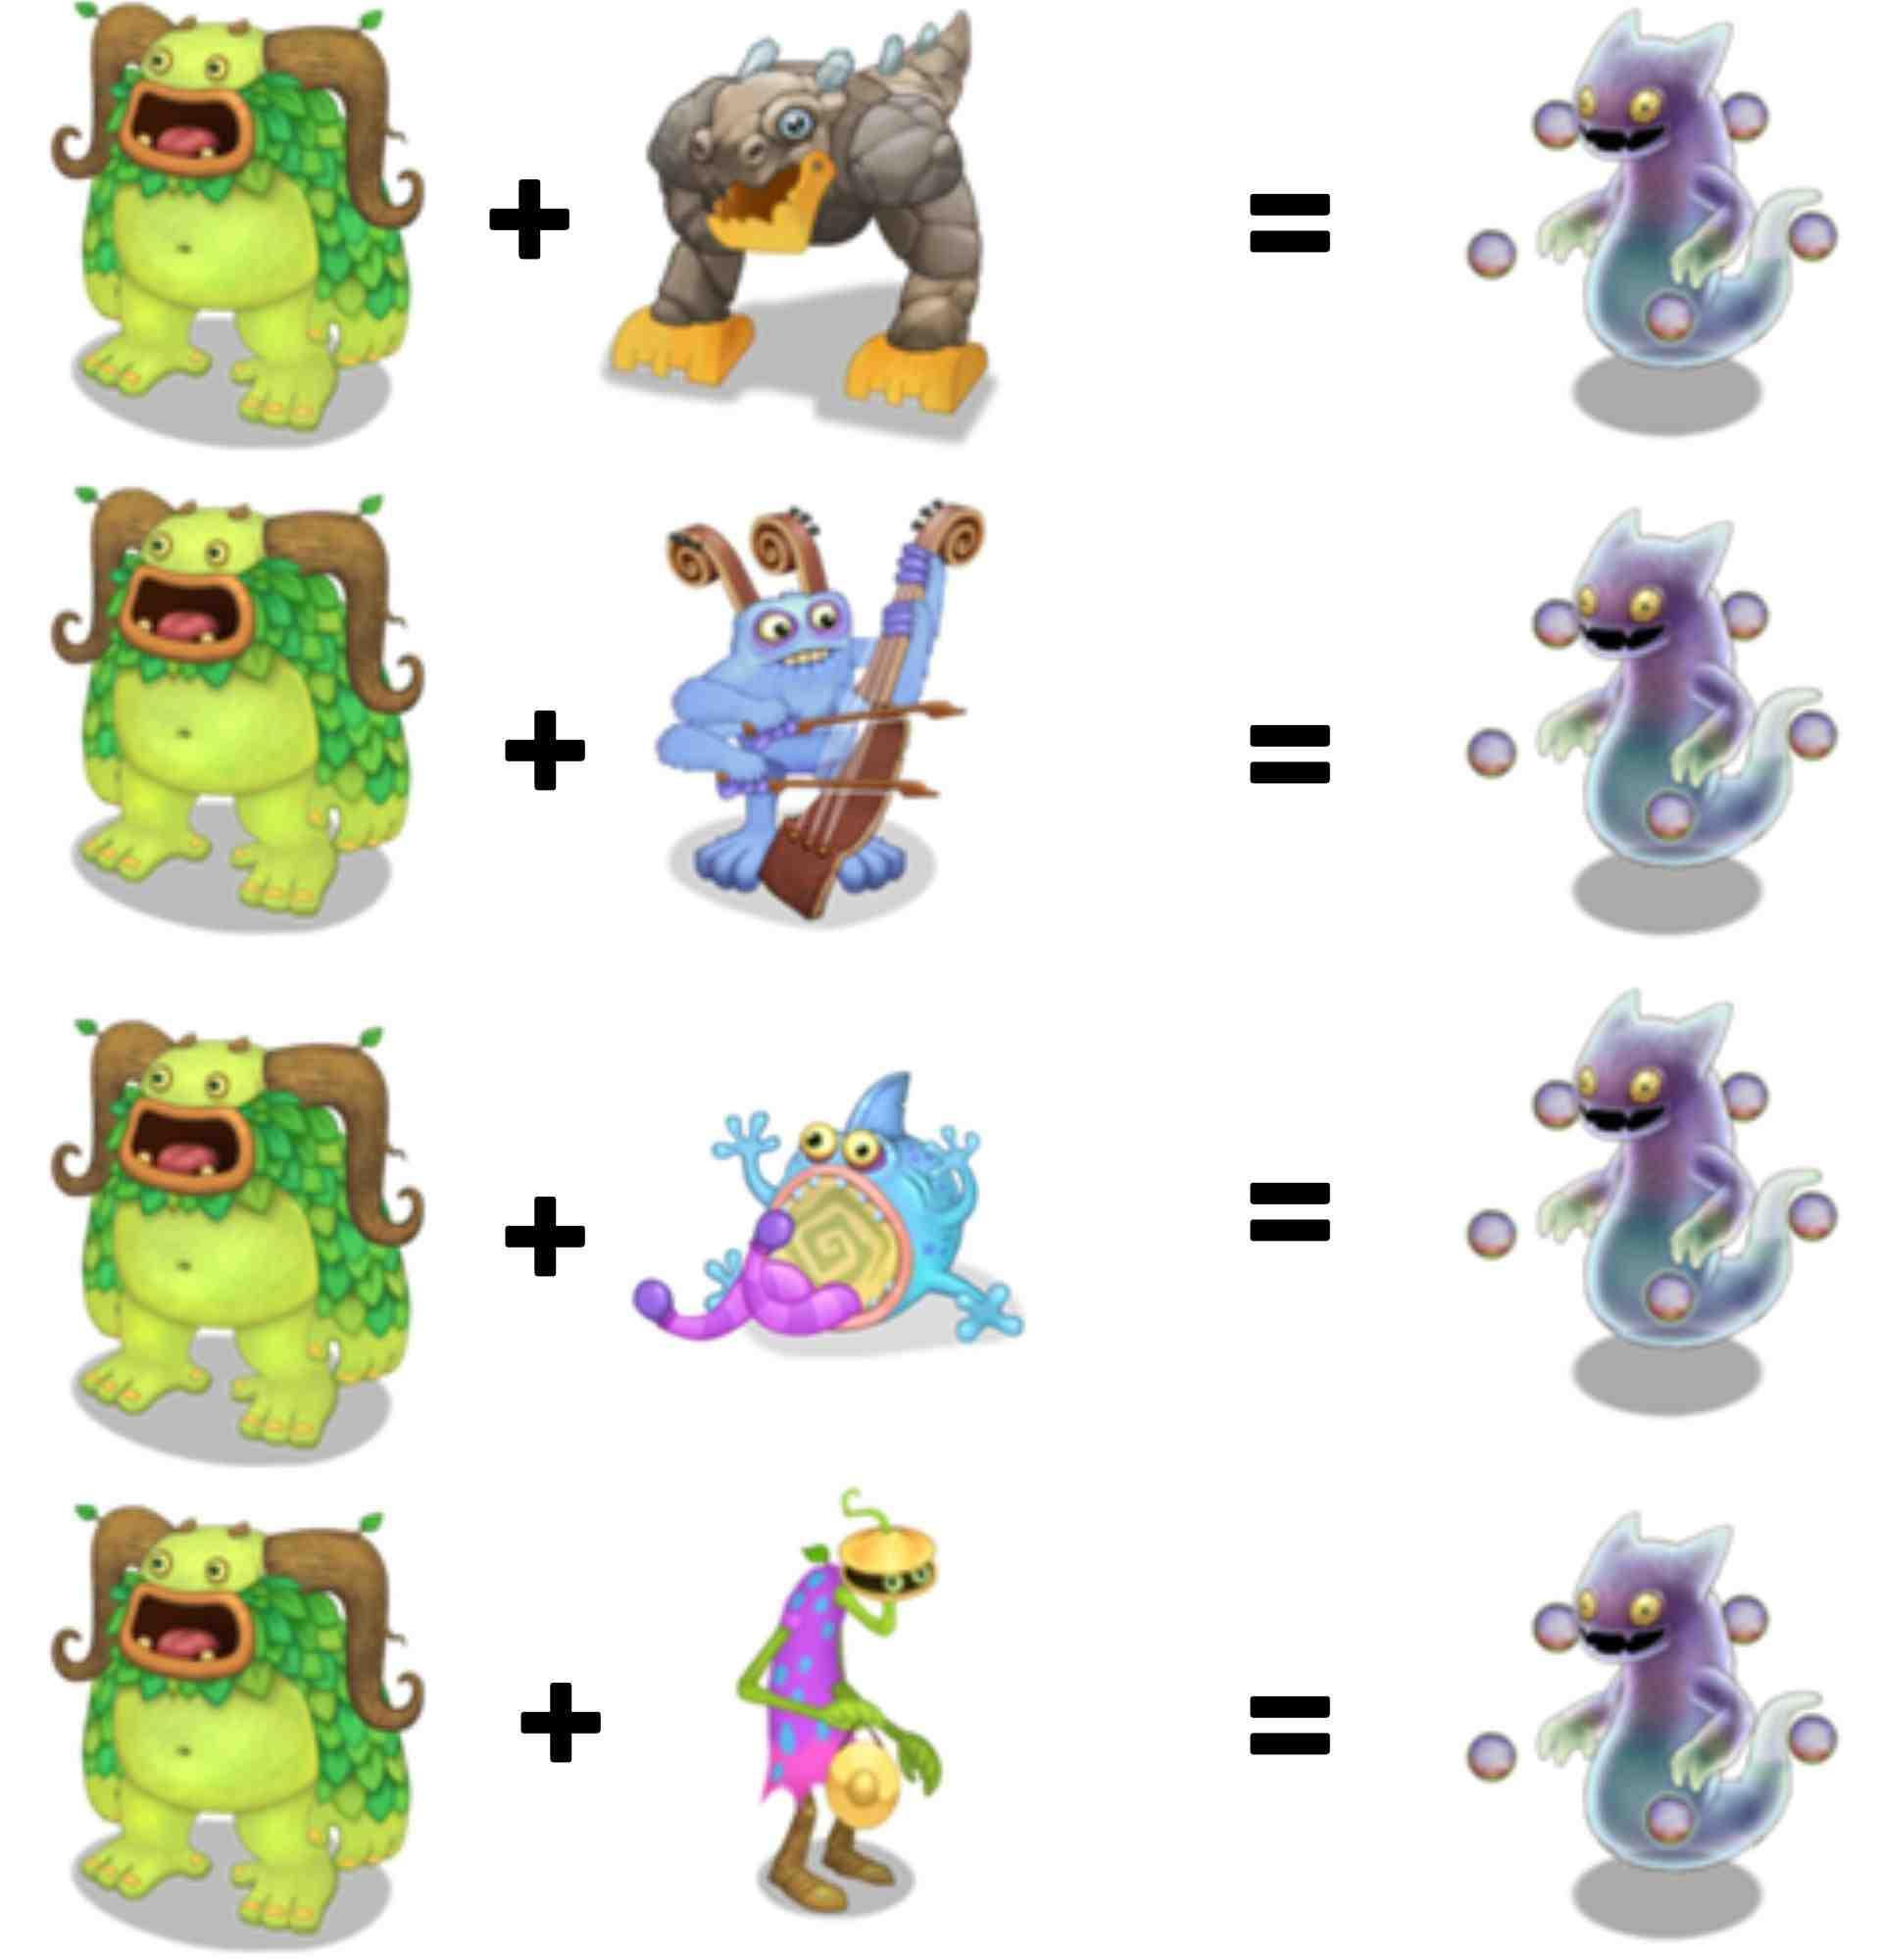 Possible Combinations Required to Breed Ghazt